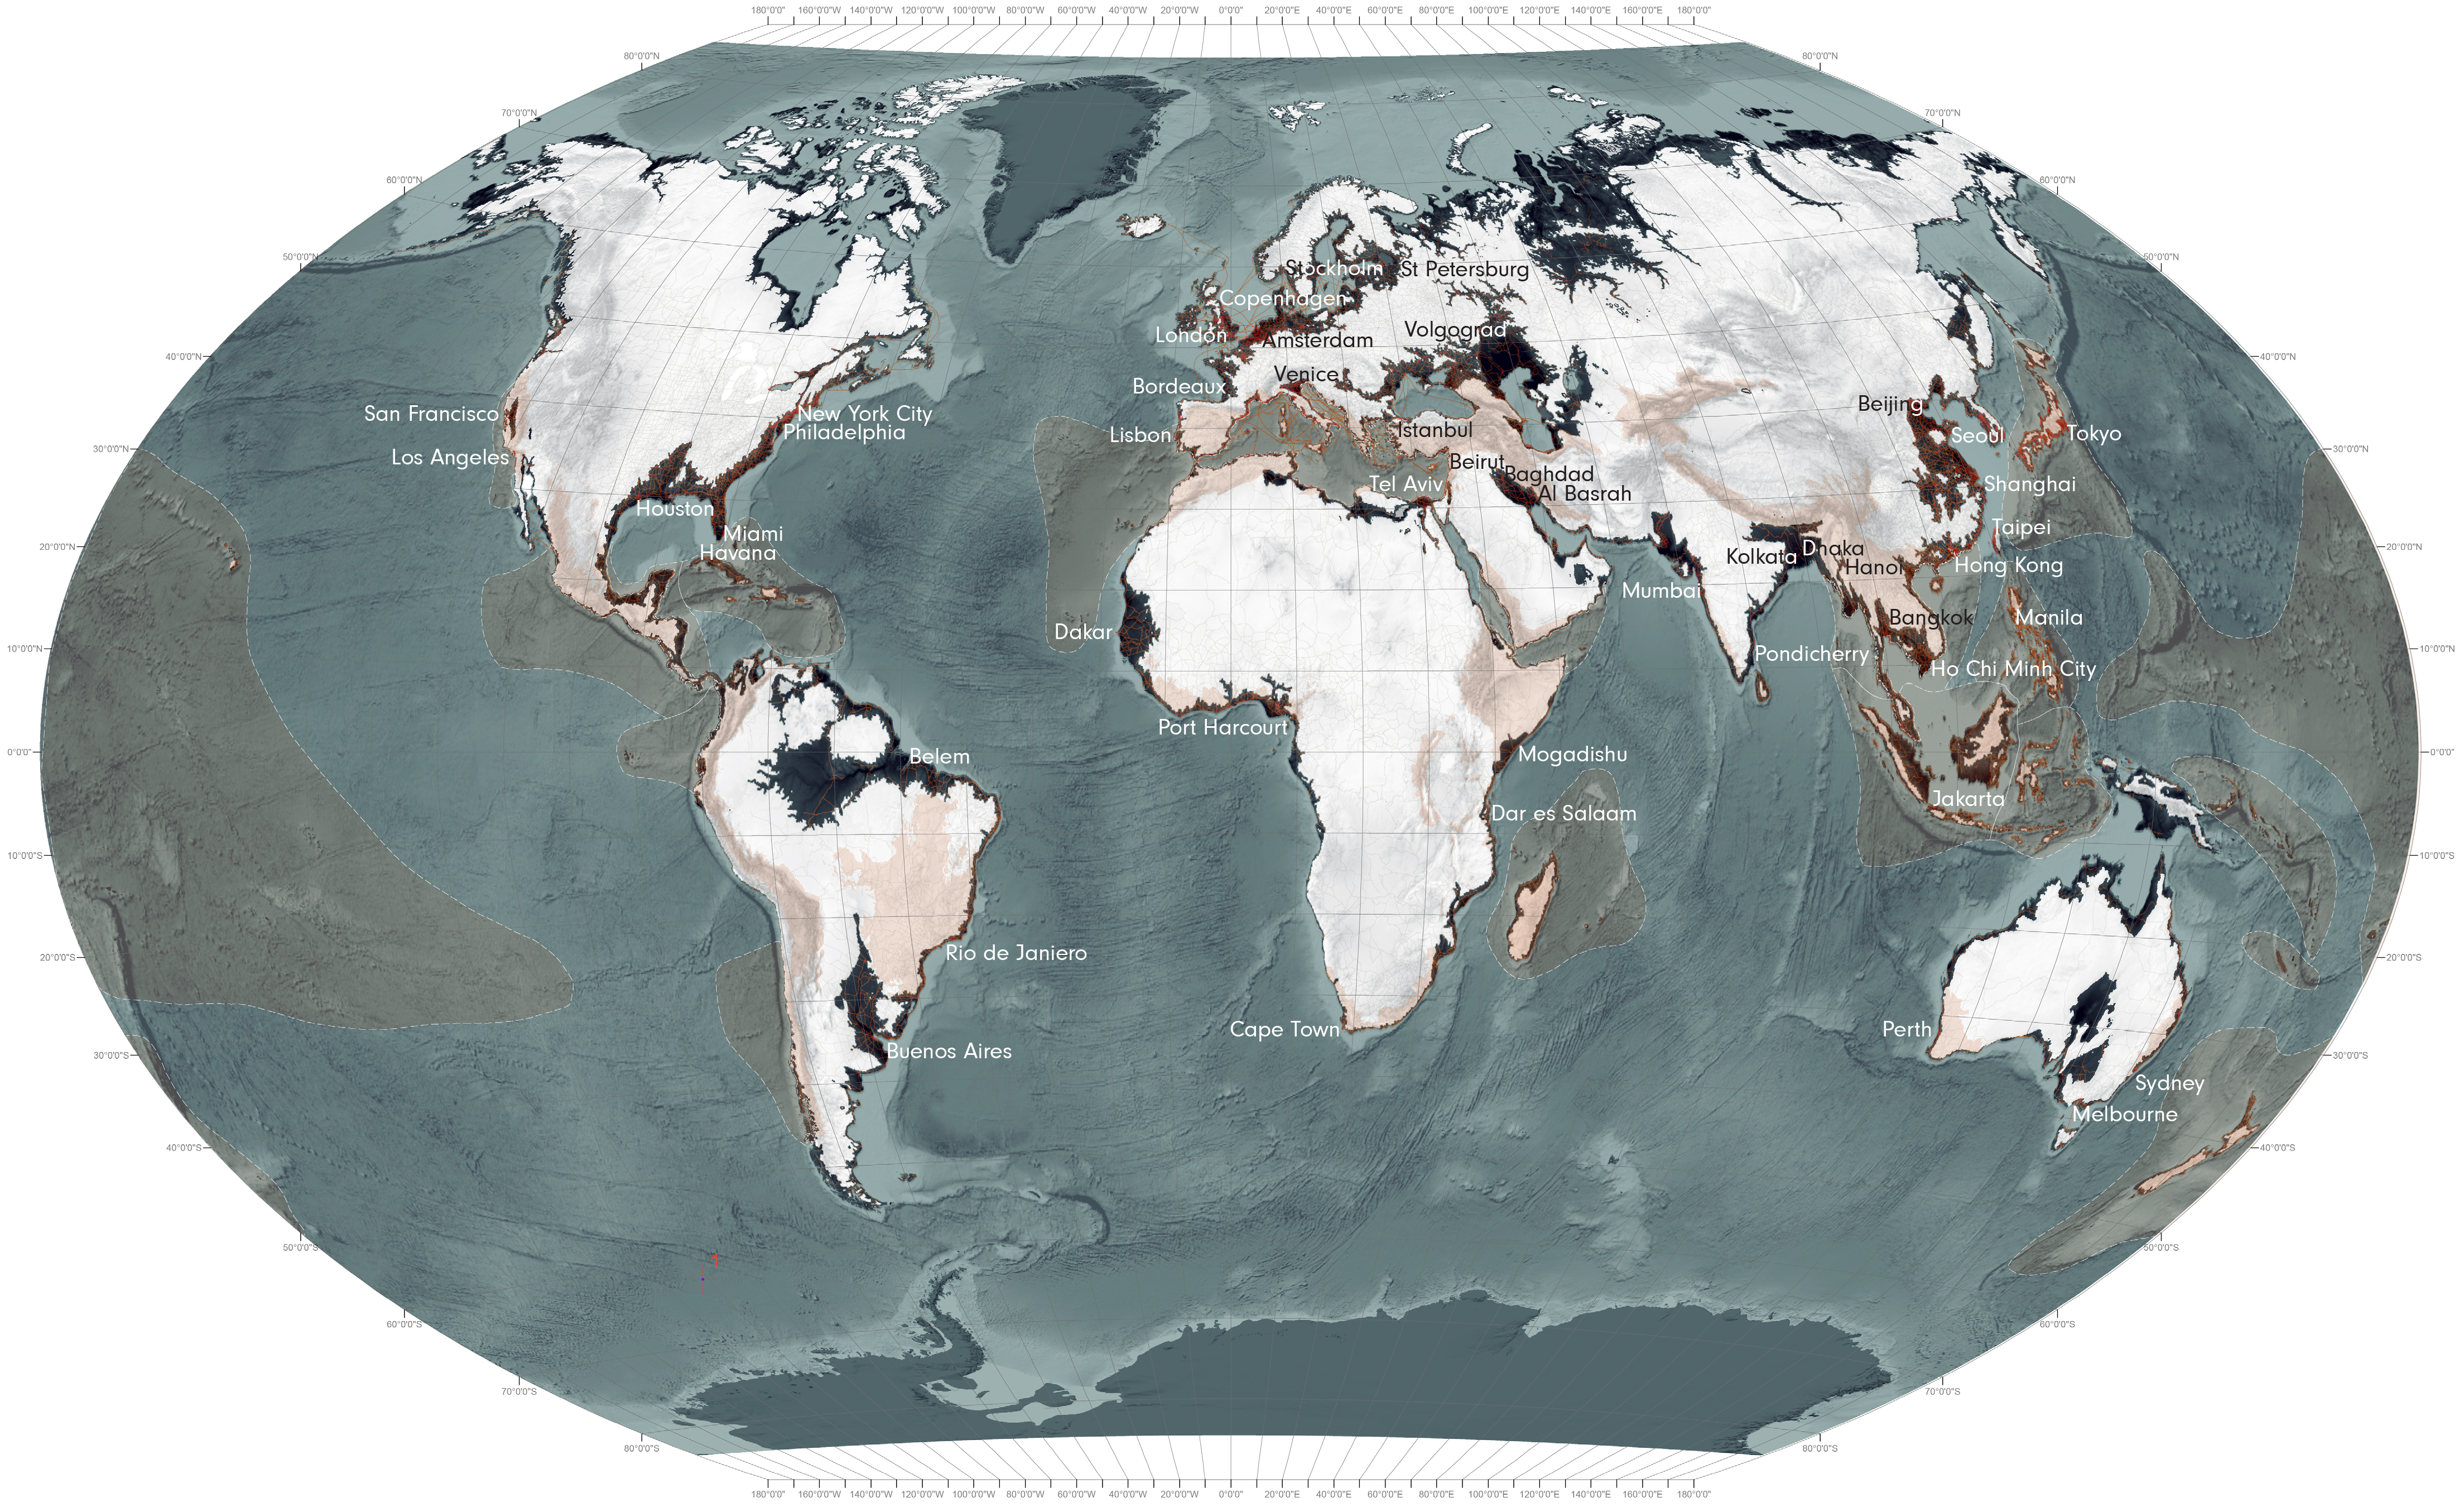 https://atlas-for-the-end-of-the-world.com/images/World_Maps/1200px/world-map-sea-level-rise-labels.png